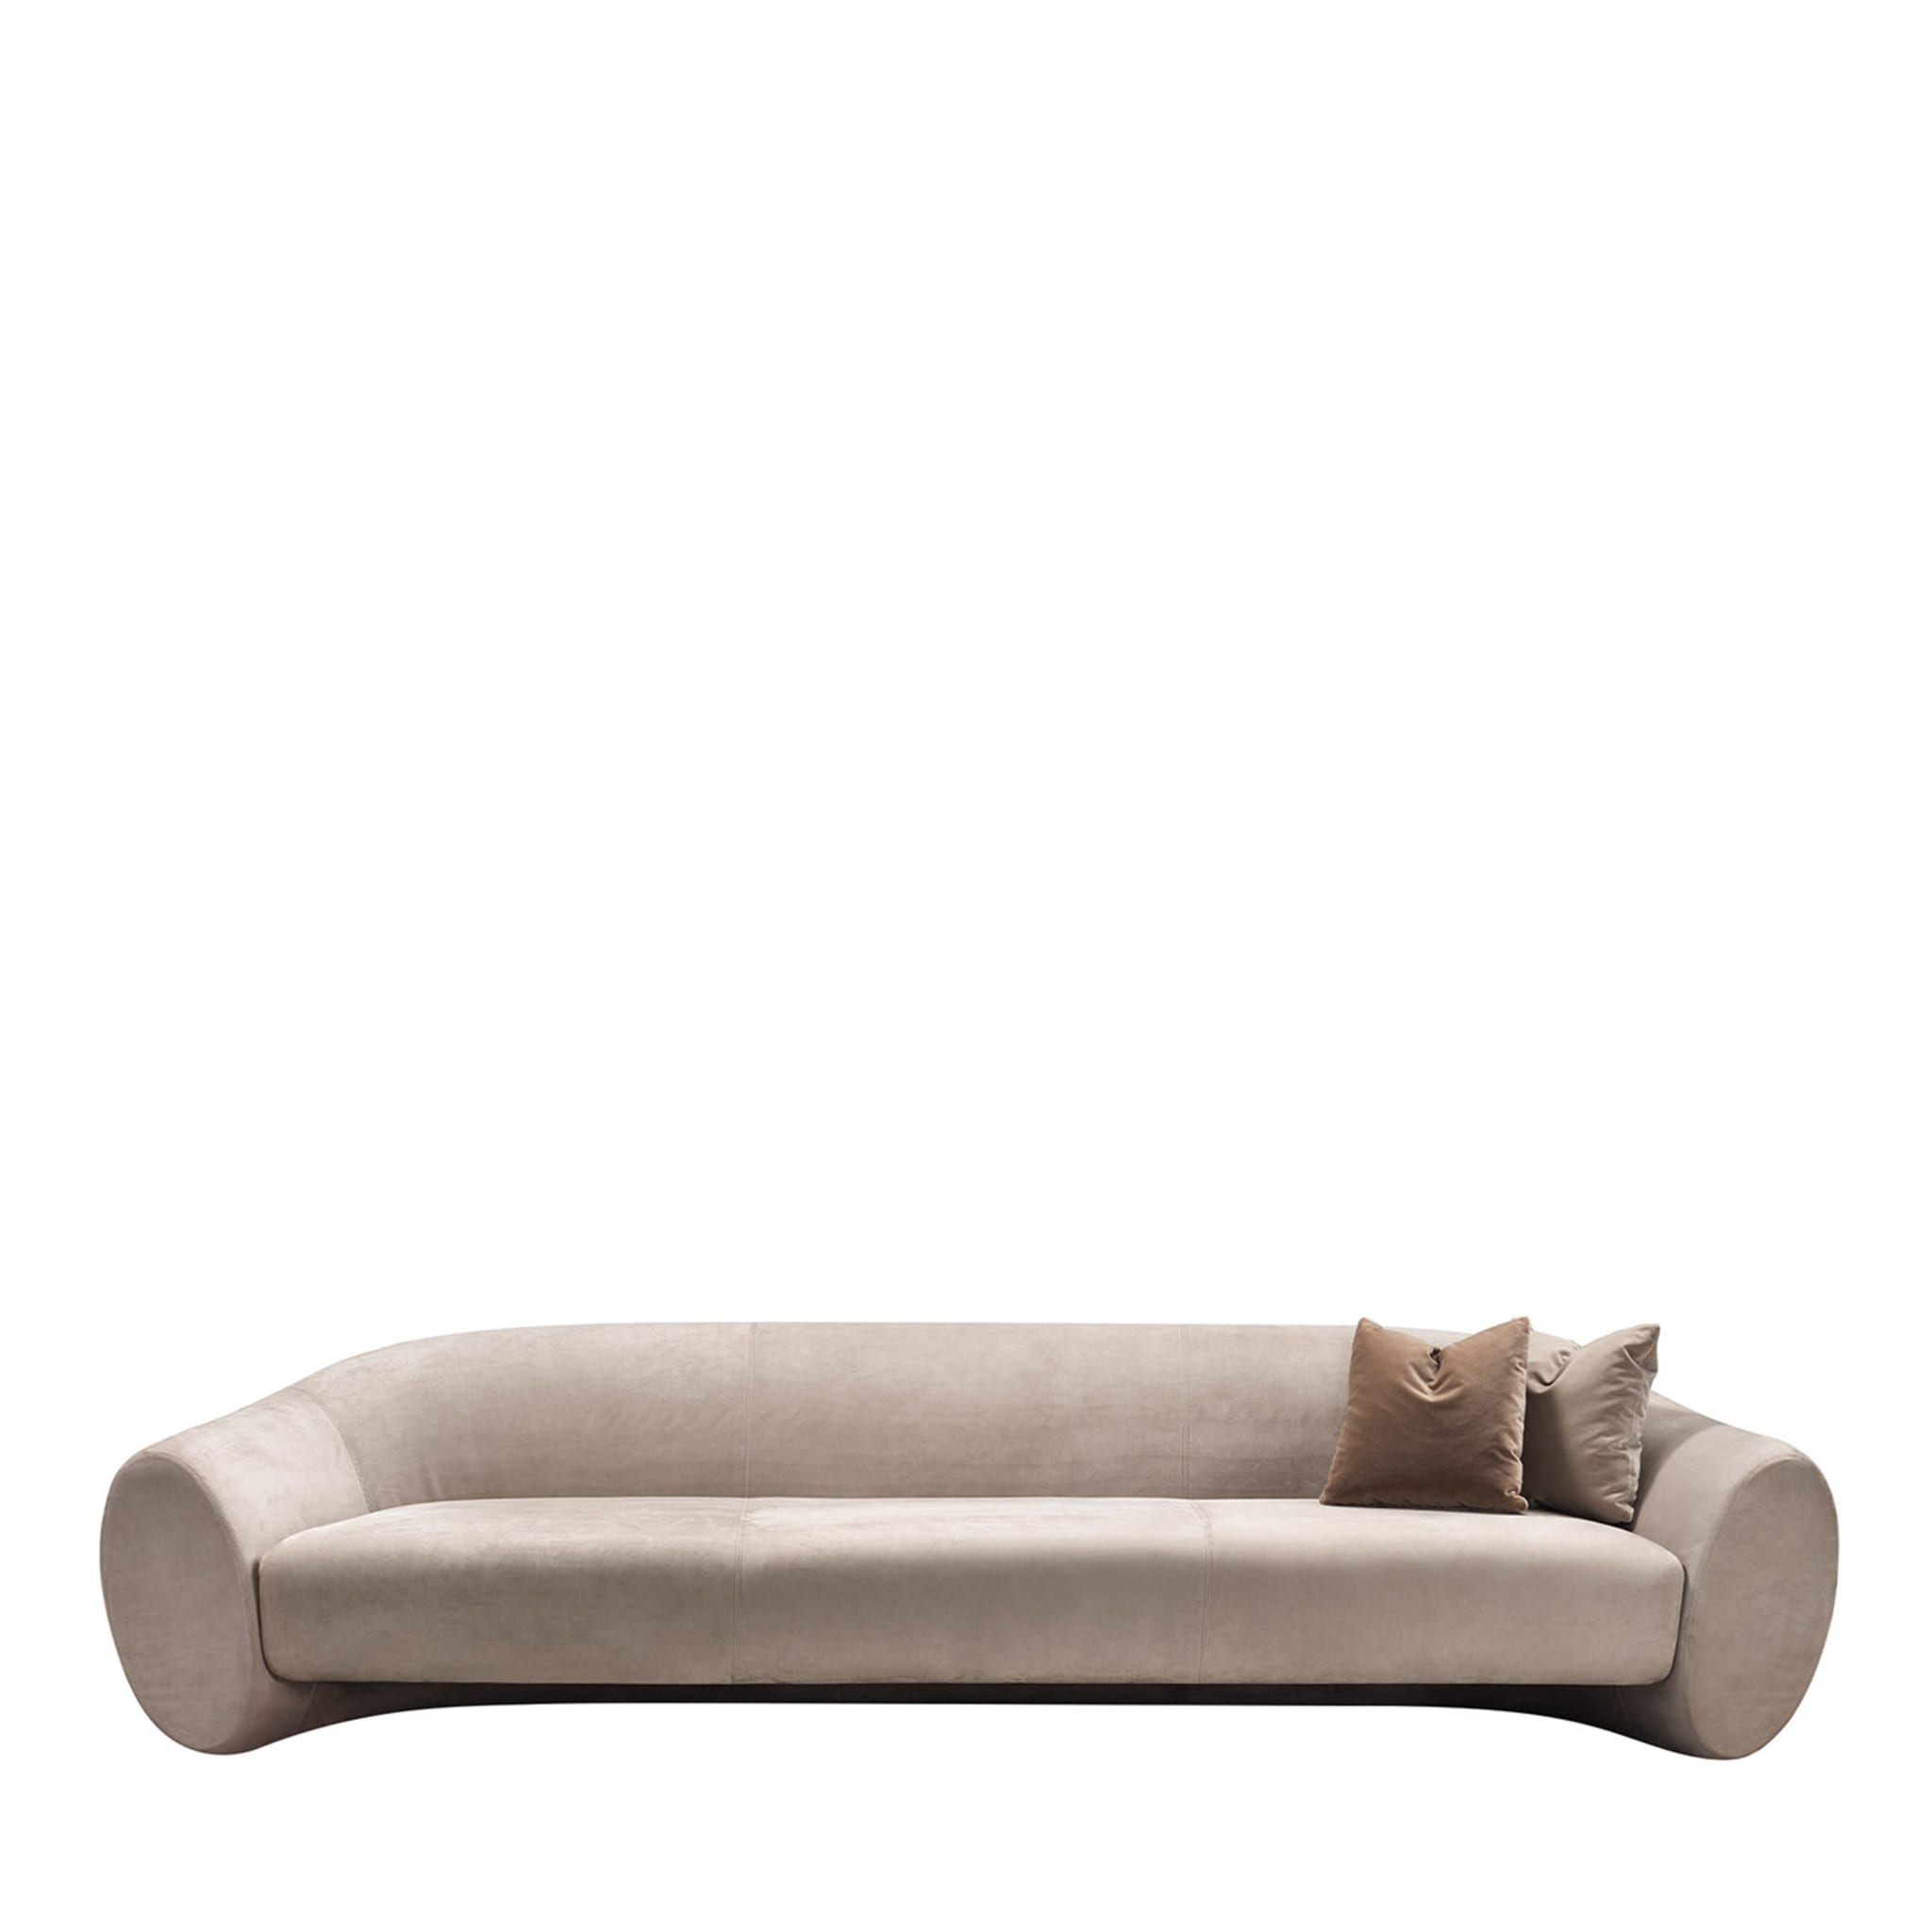 Elephant 3-Seater Beige Sofa by Stefano Giovannoni - Main view